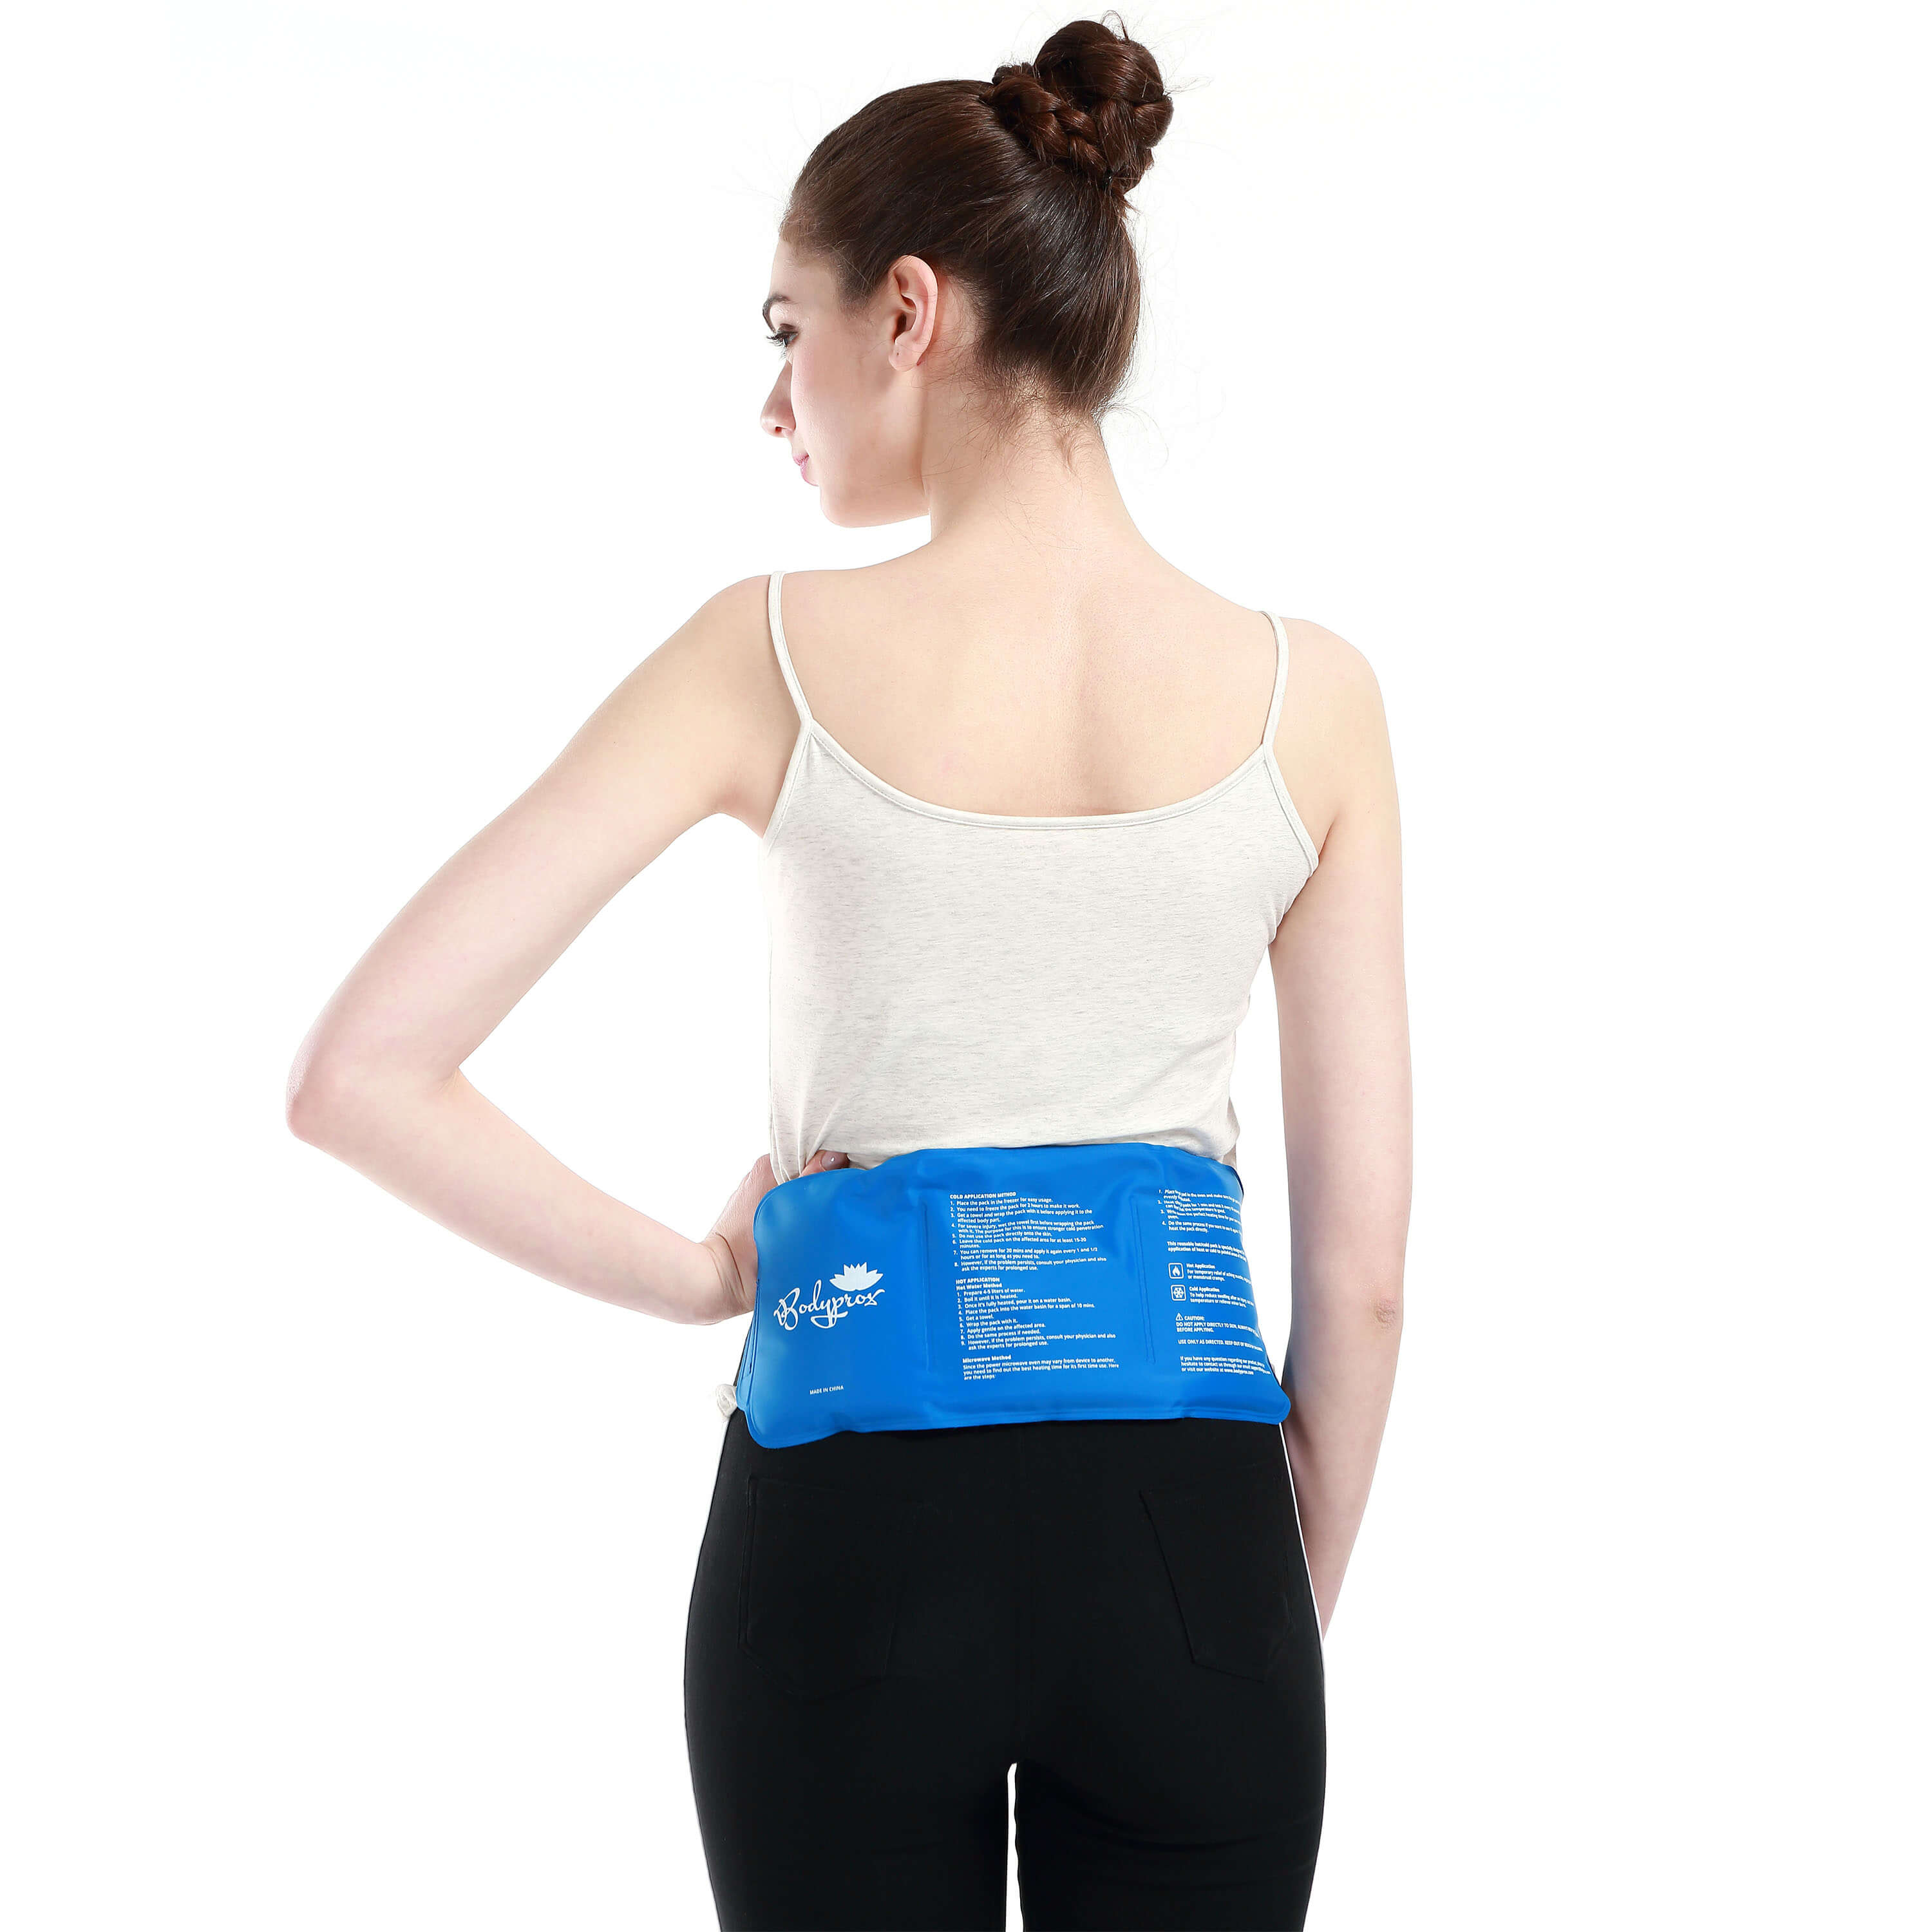 Maternity Back Pain Relief with Ice/Heat Therapy + Support by Spand-Ice